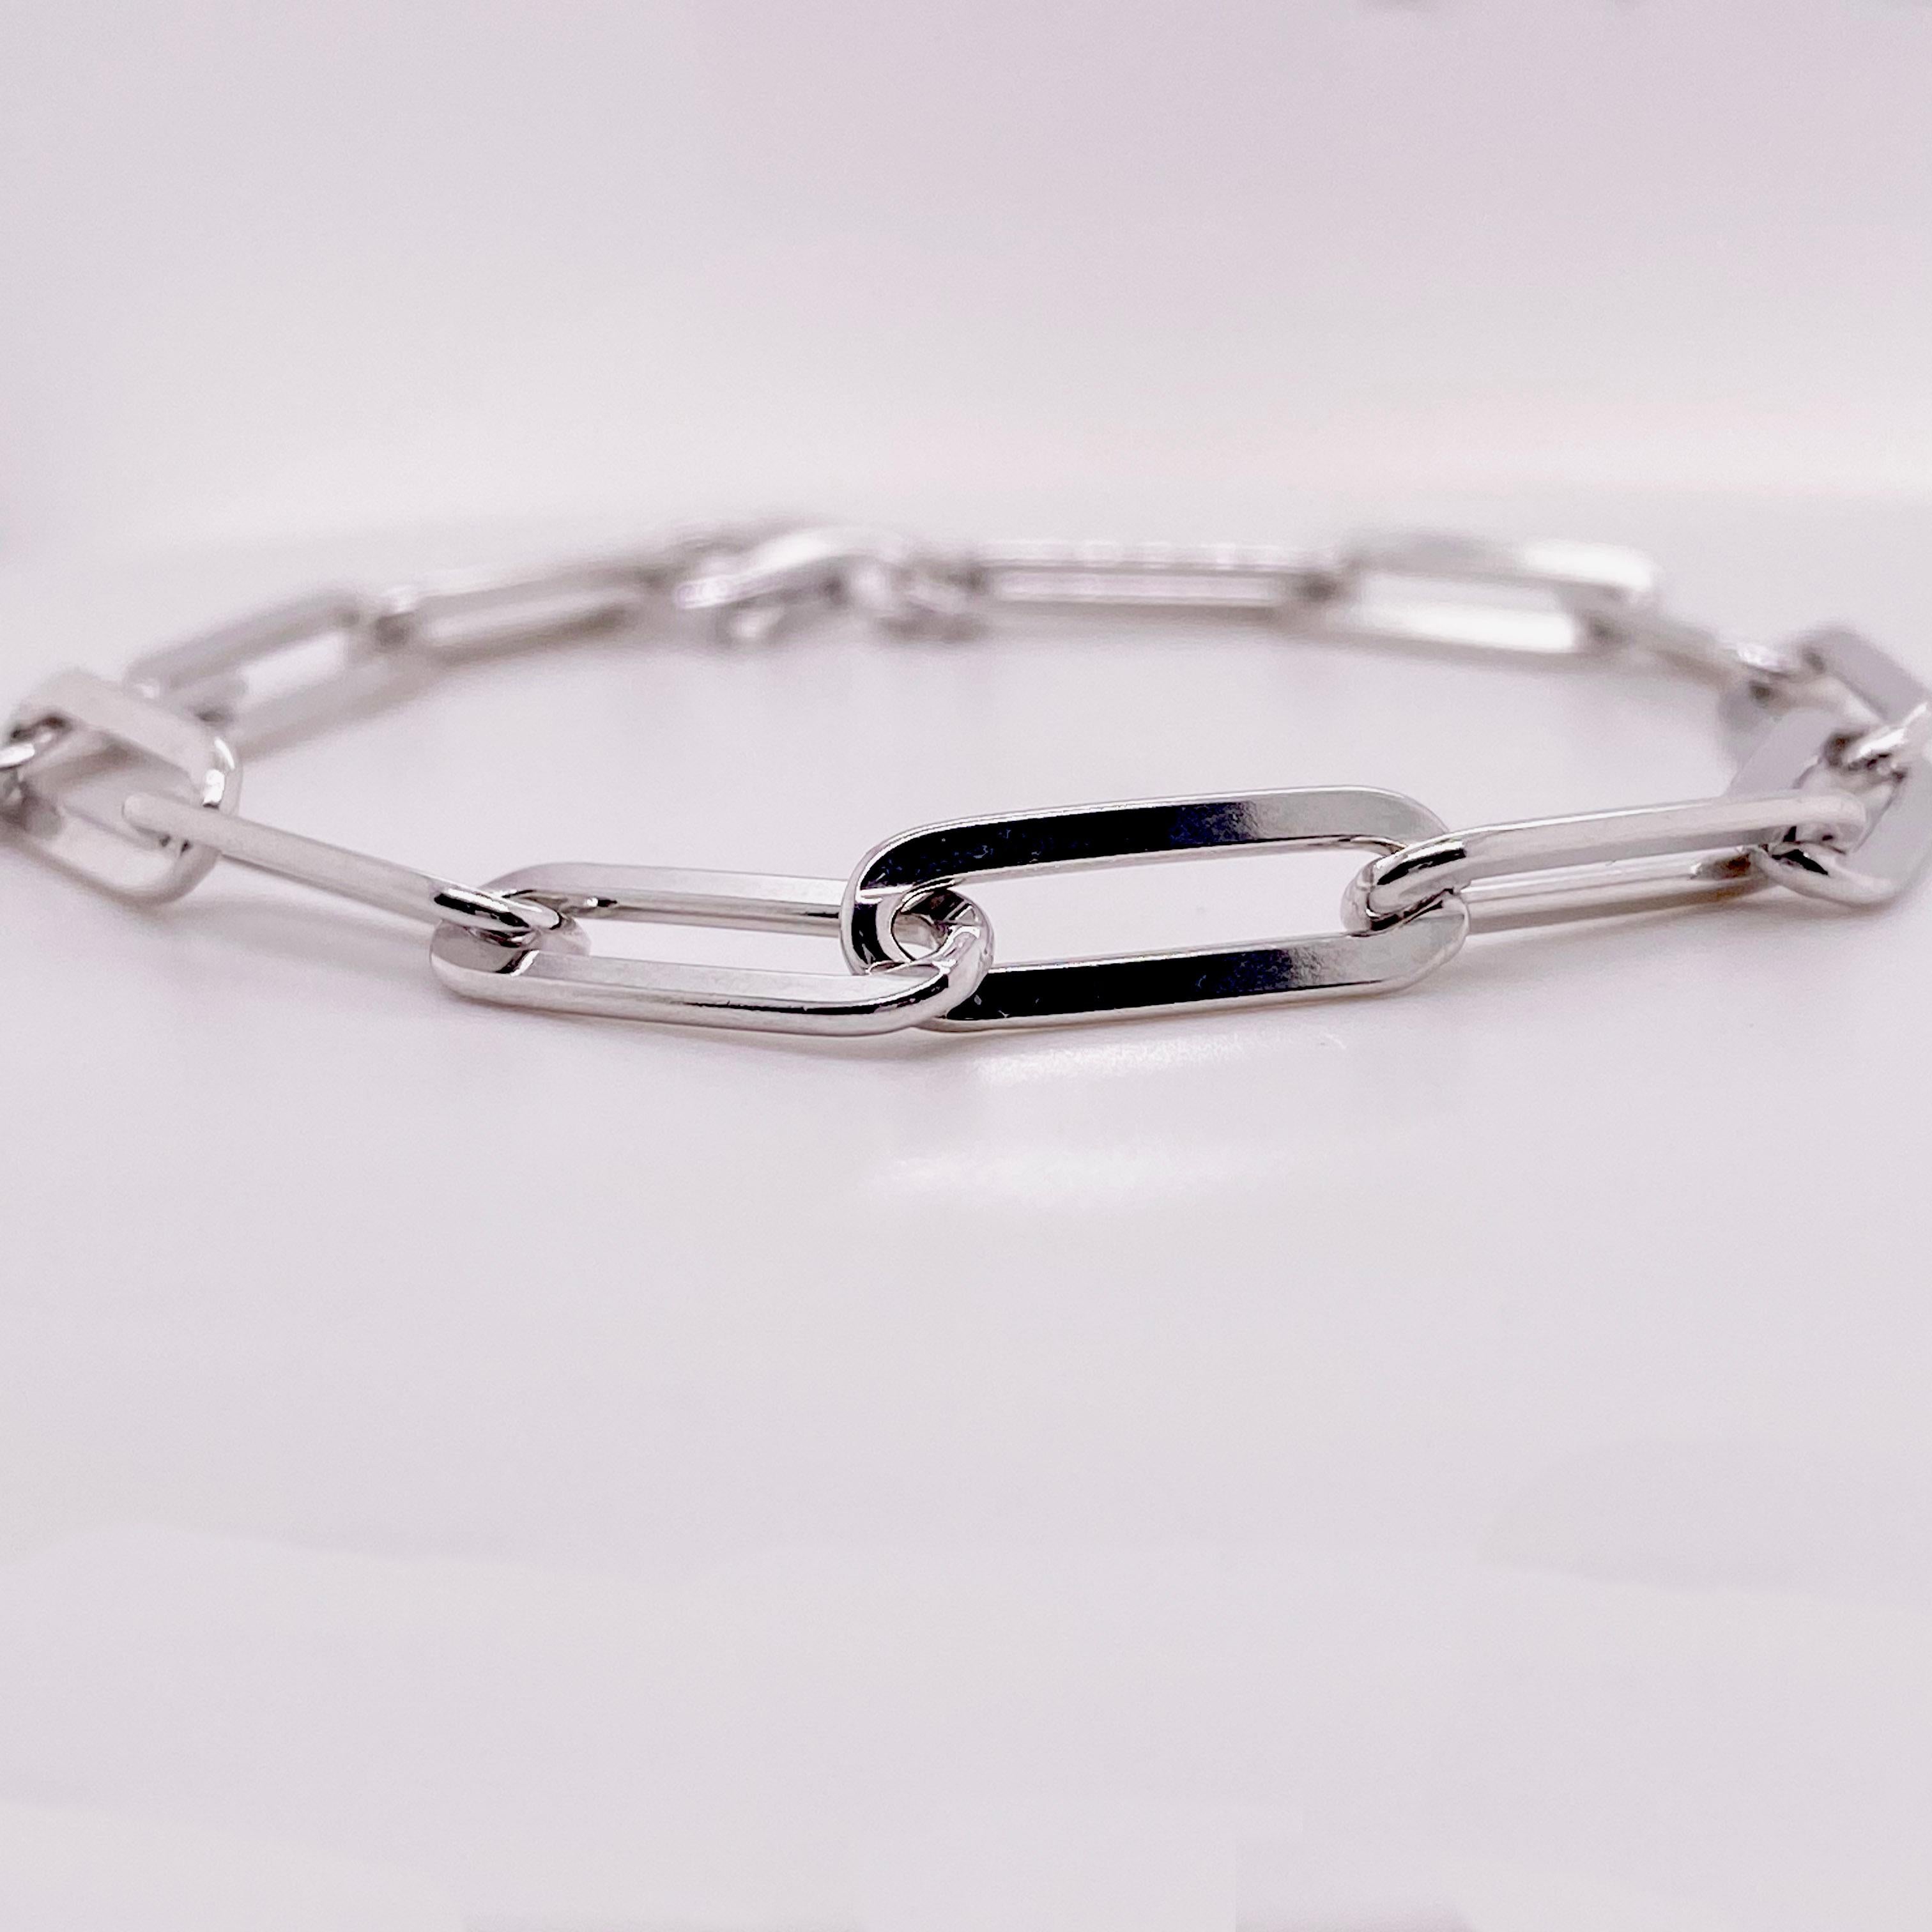 The details for this gorgeous bracelet are listed below:
Bracelet Type: Paper Clip 
Metal Quality: Sterling Silver
Length: 7.5 in 
Width: 5.8 mm
Clasp: Lobster Clasp 
Total Weight: 9.7 g 
